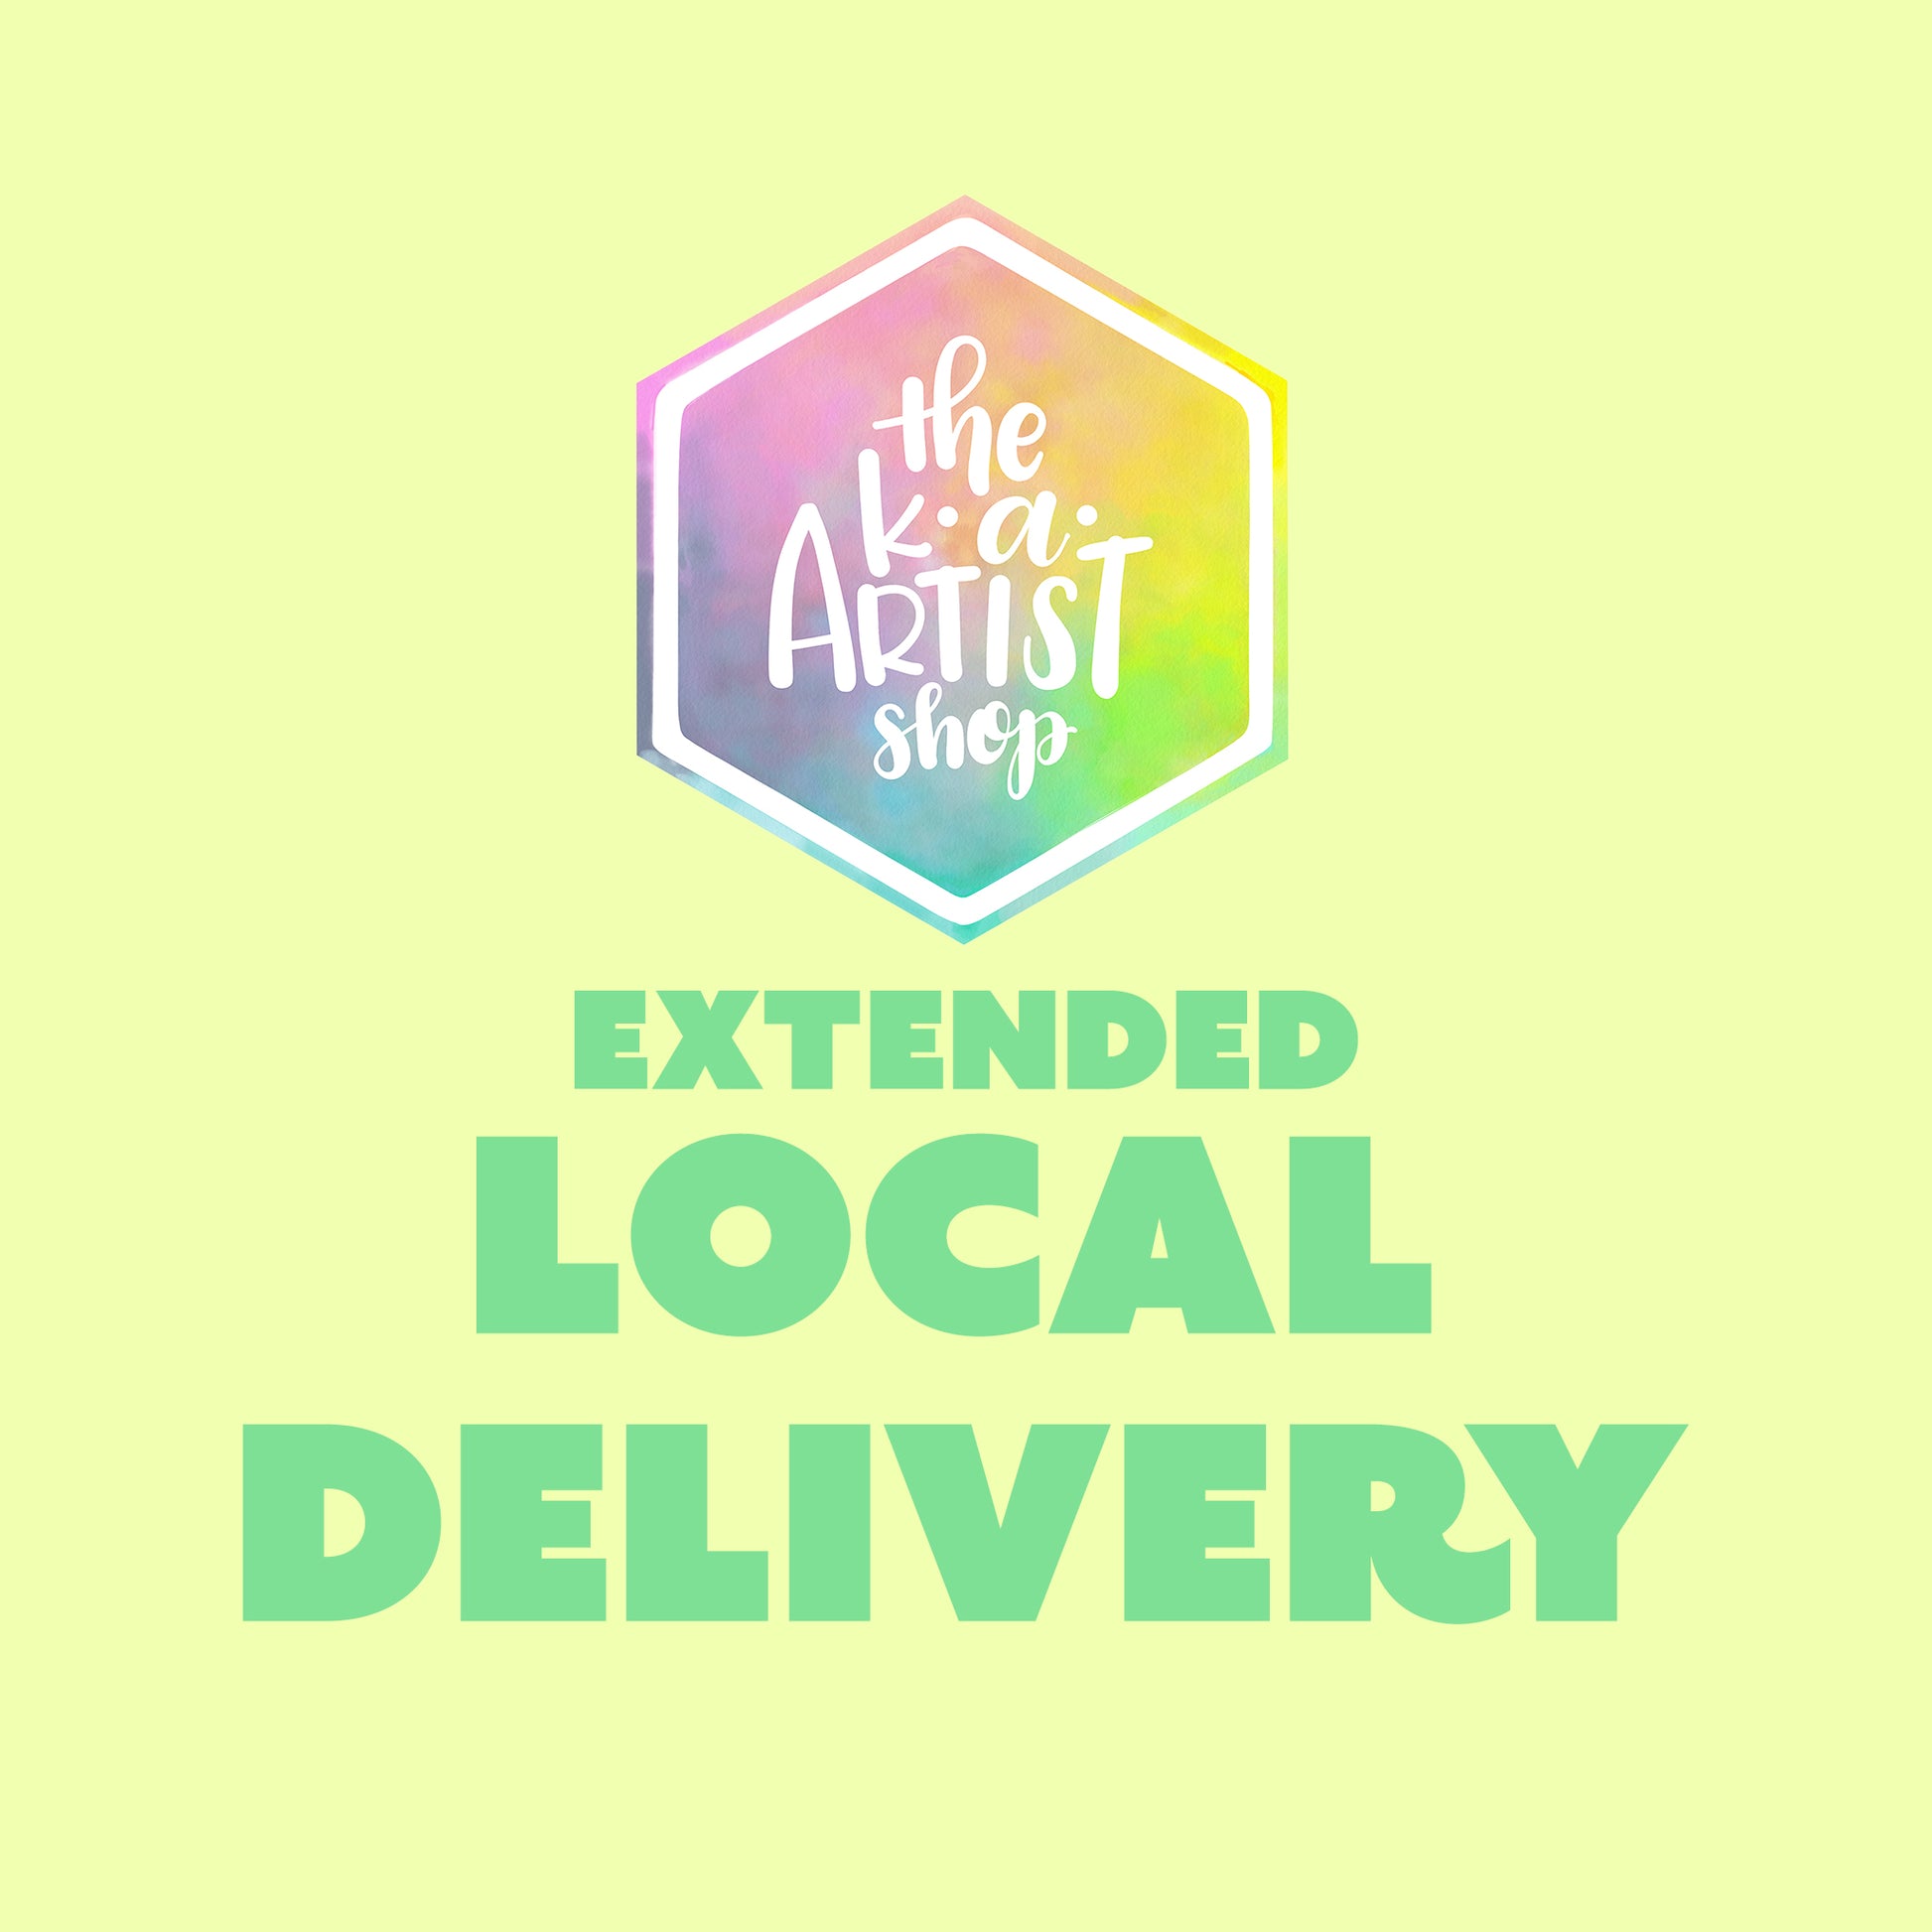 Extended Local Delivery (for orders $25+) - by K. A. Artist Shop - K. A. Artist Shop